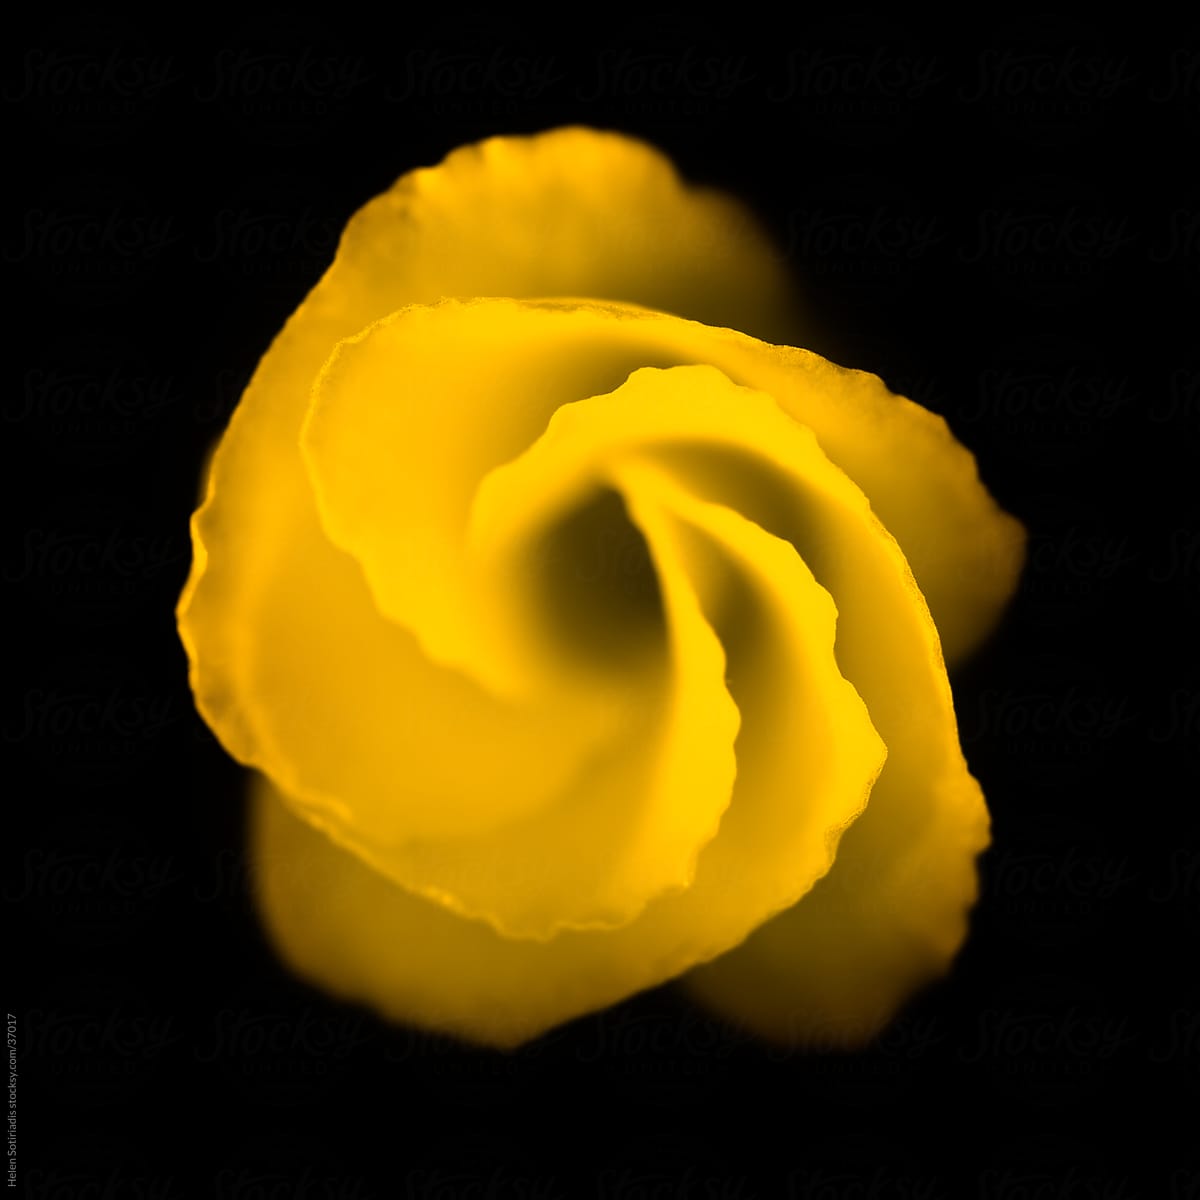 Yellow Bell Flower on Black Background